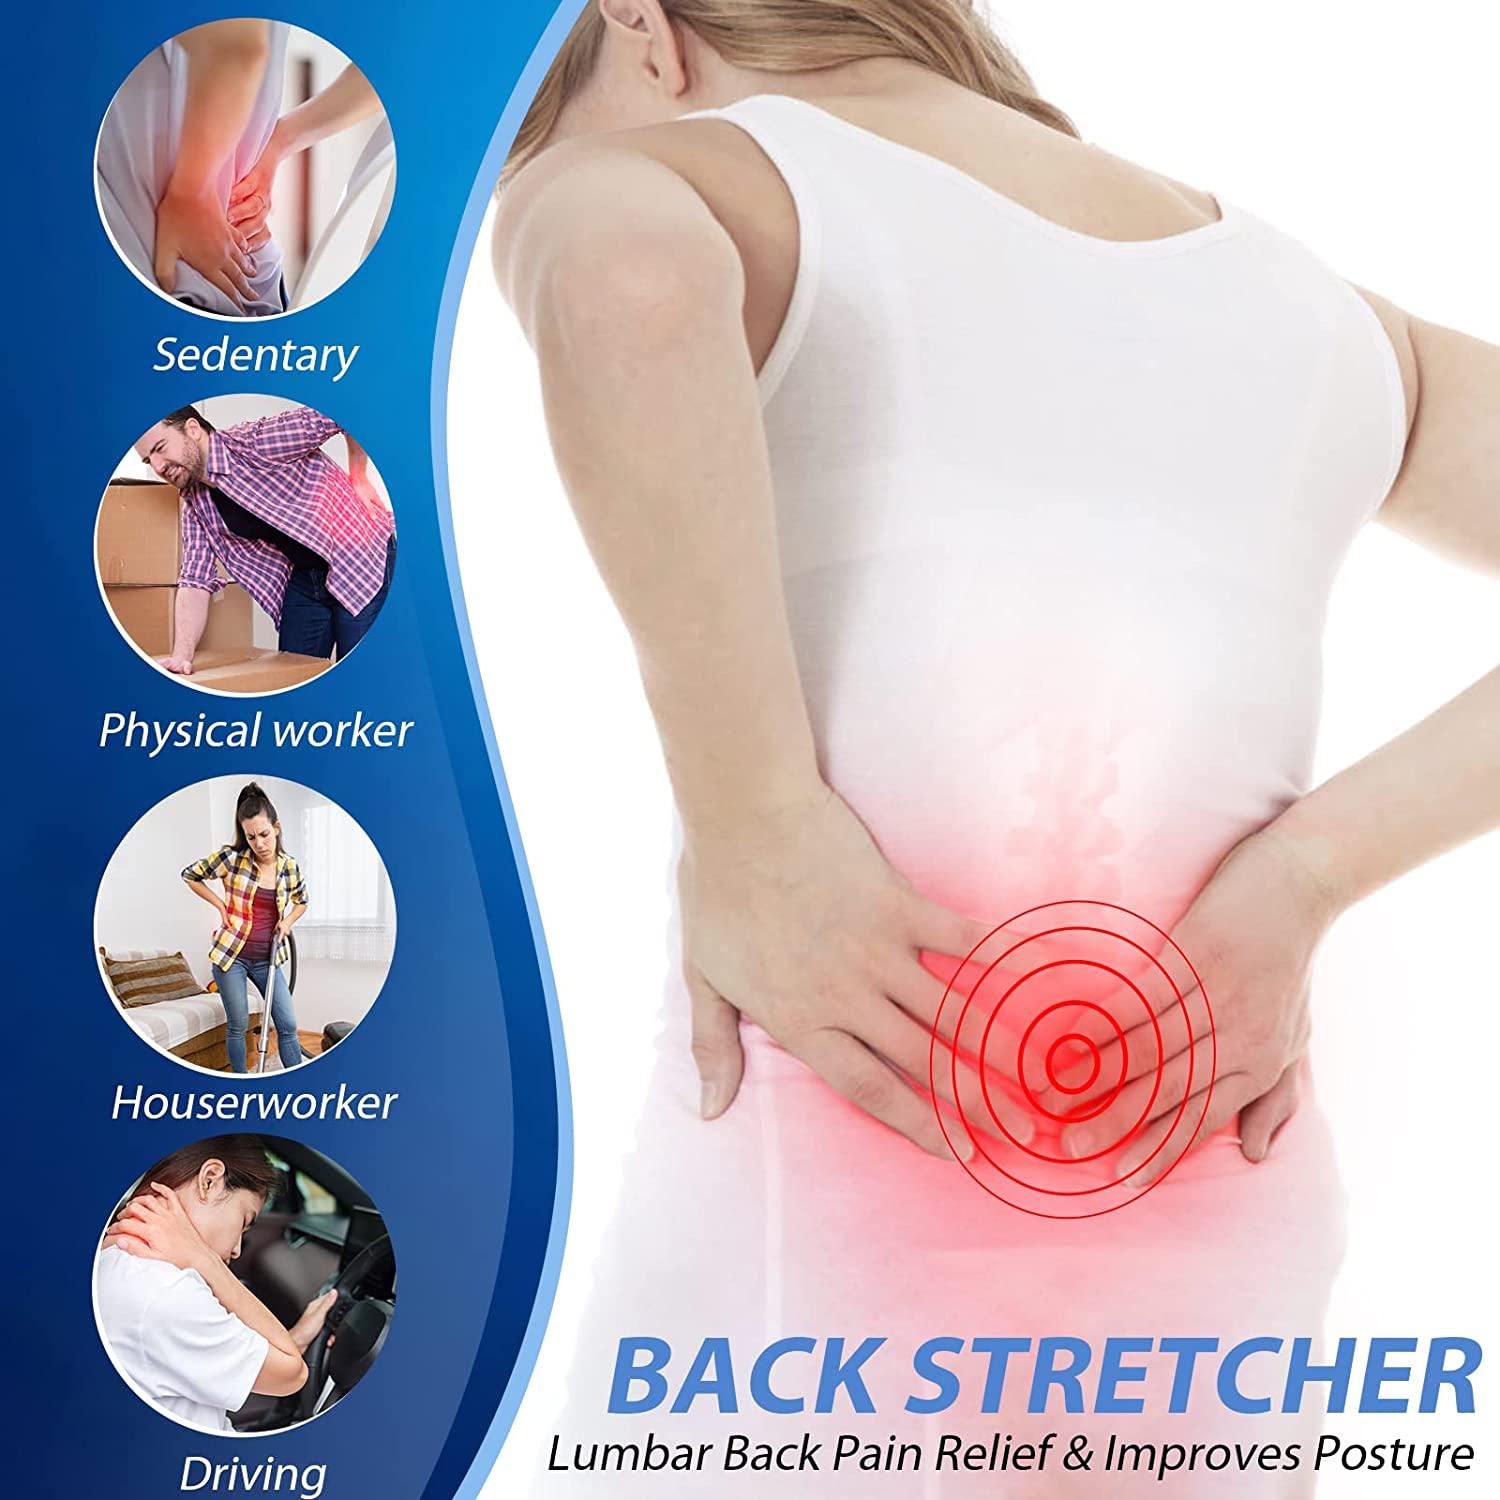 Back and Abdominal Pain Relief Device